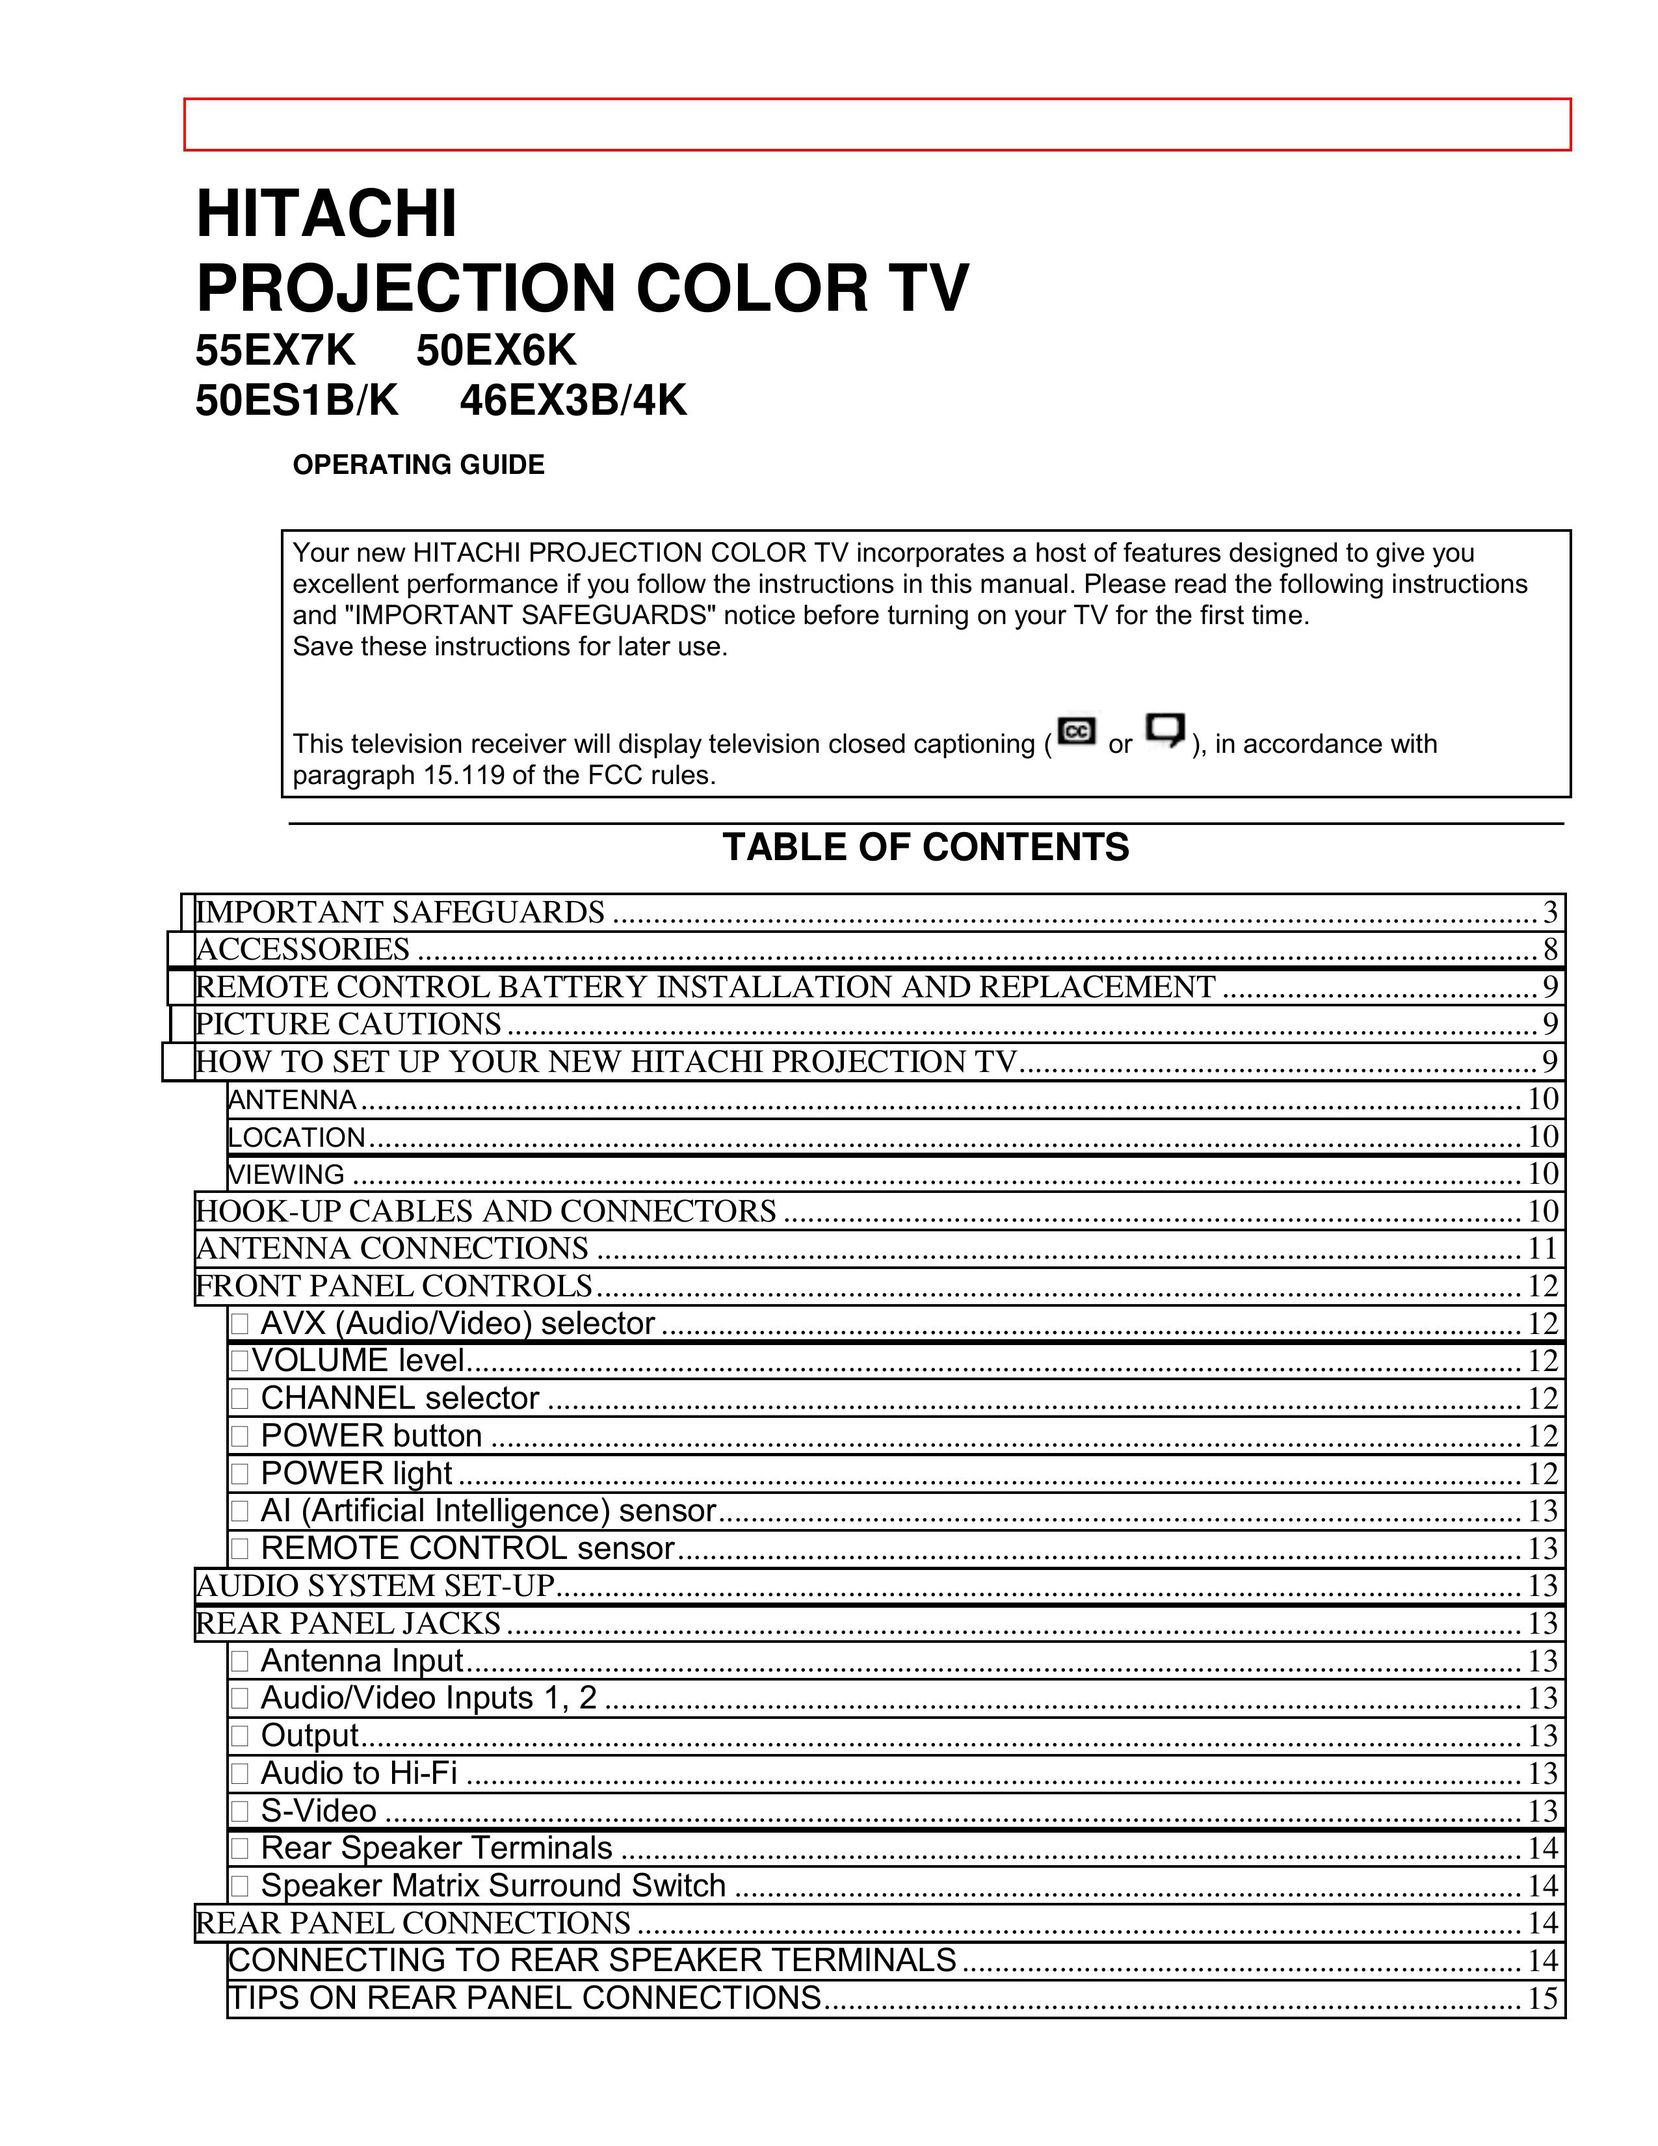 Hitachi 50EX6K Projection Television User Manual